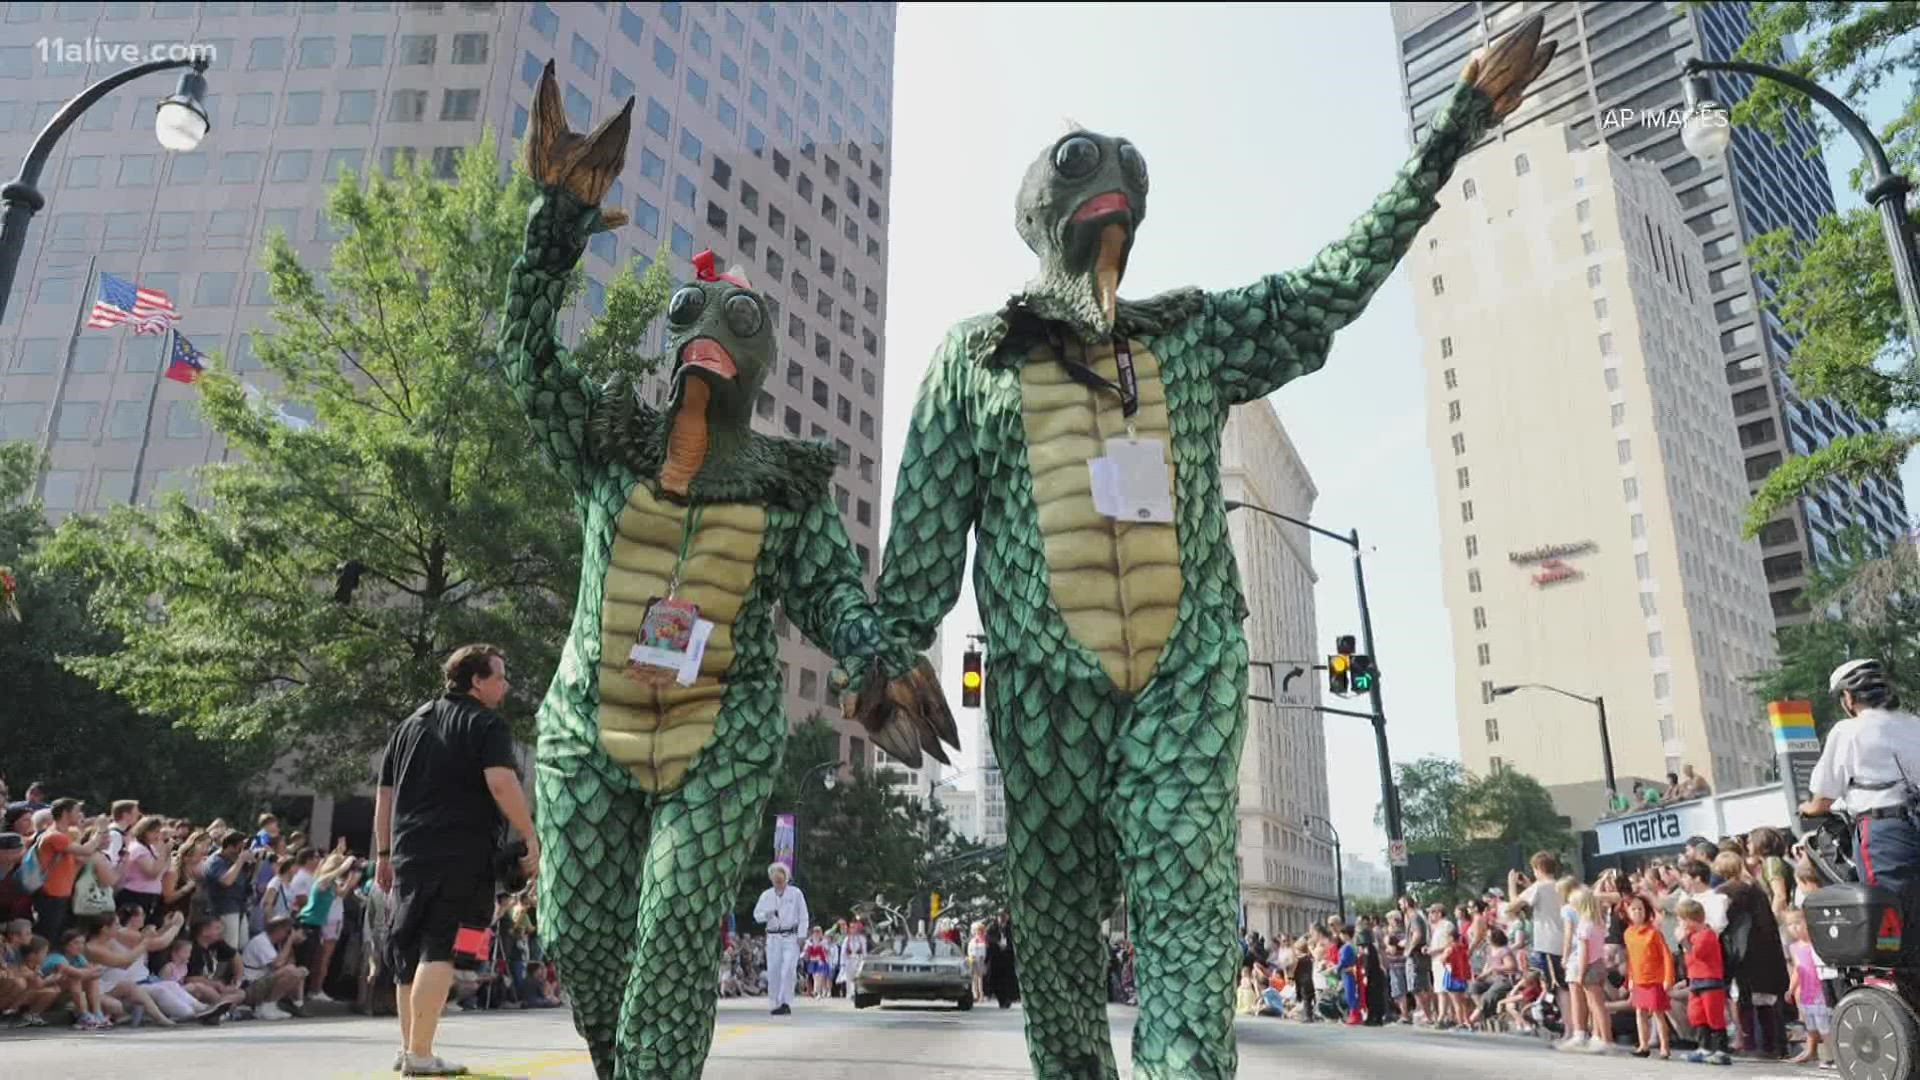 Here's what you need to know about Dragon Con and the changes being made due to the coronavirus pandemic.